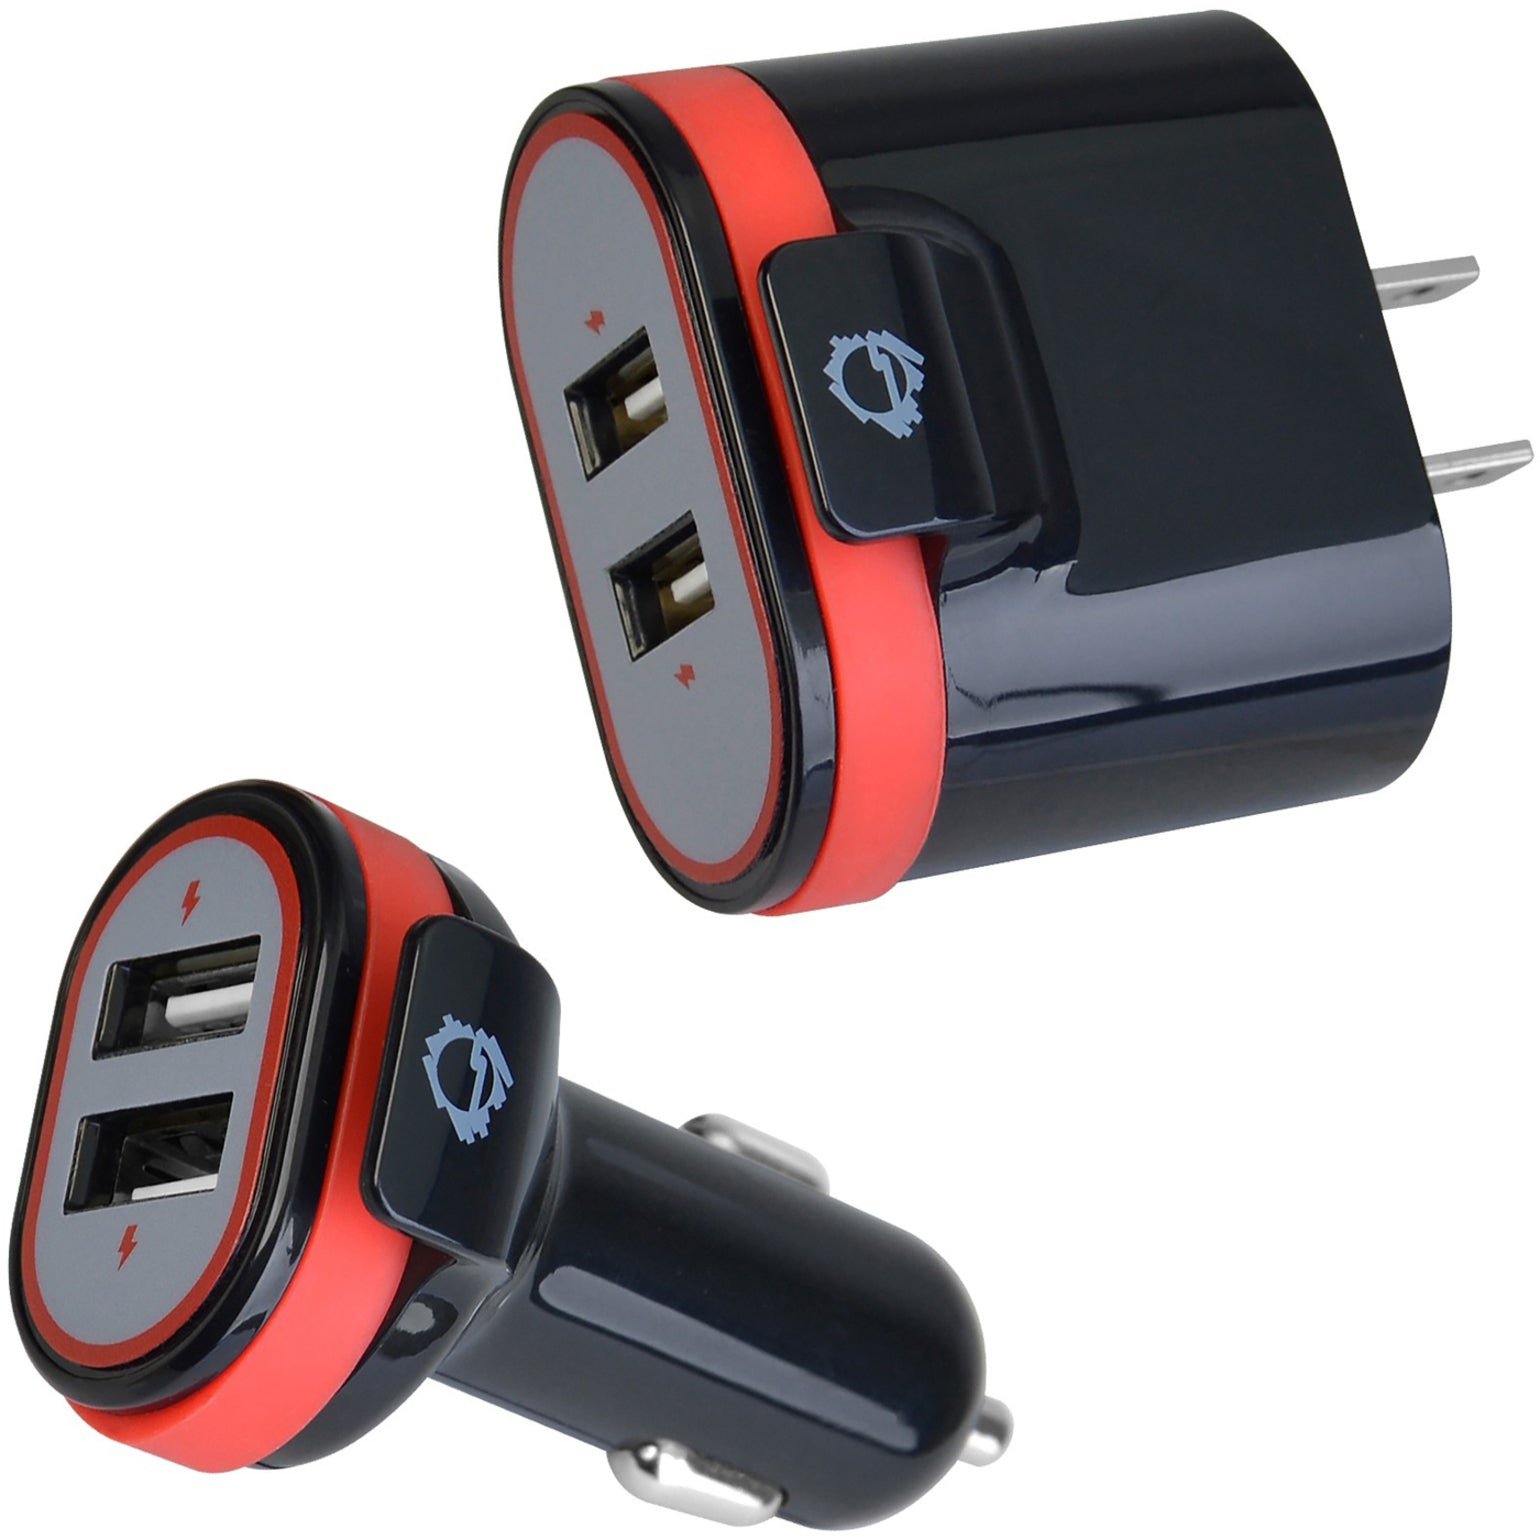 SIIG AC-PW1A12-S1 Fast Charging USB Wall Charger & Car Charger Bundle Pack - Black, 3.4A Output, 1 Year Warranty